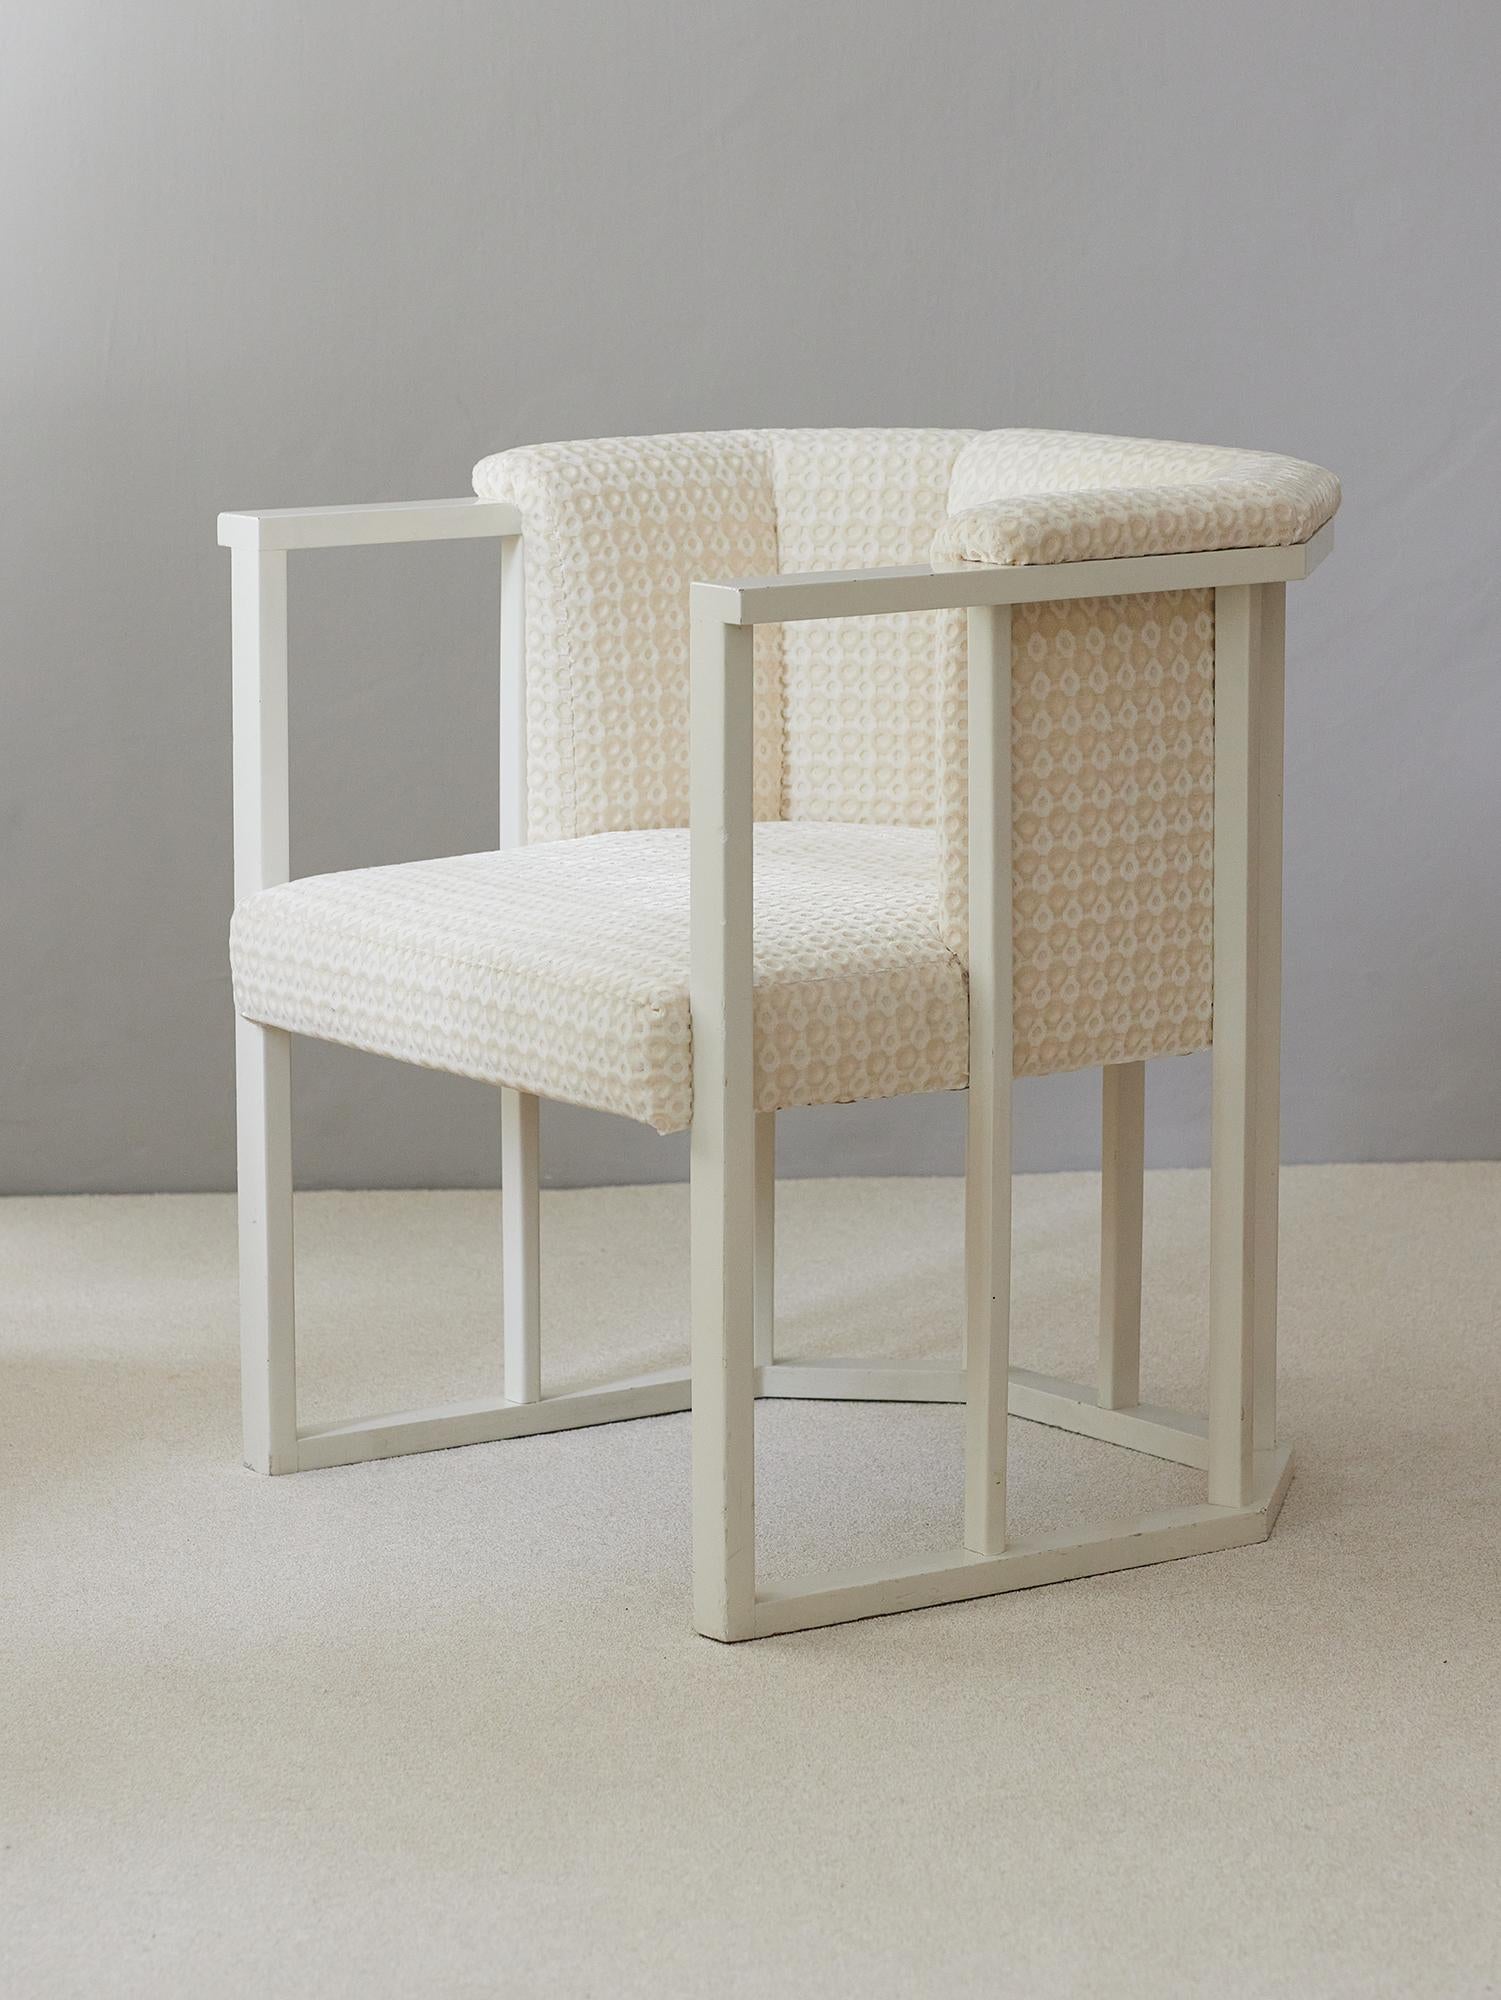 . Impressive off-white armchair in Jugendstil style If you want something unique We are proud to present this vintage Dieter Knoll armchair, which we have now given new life with the Fendi Casa upholstery